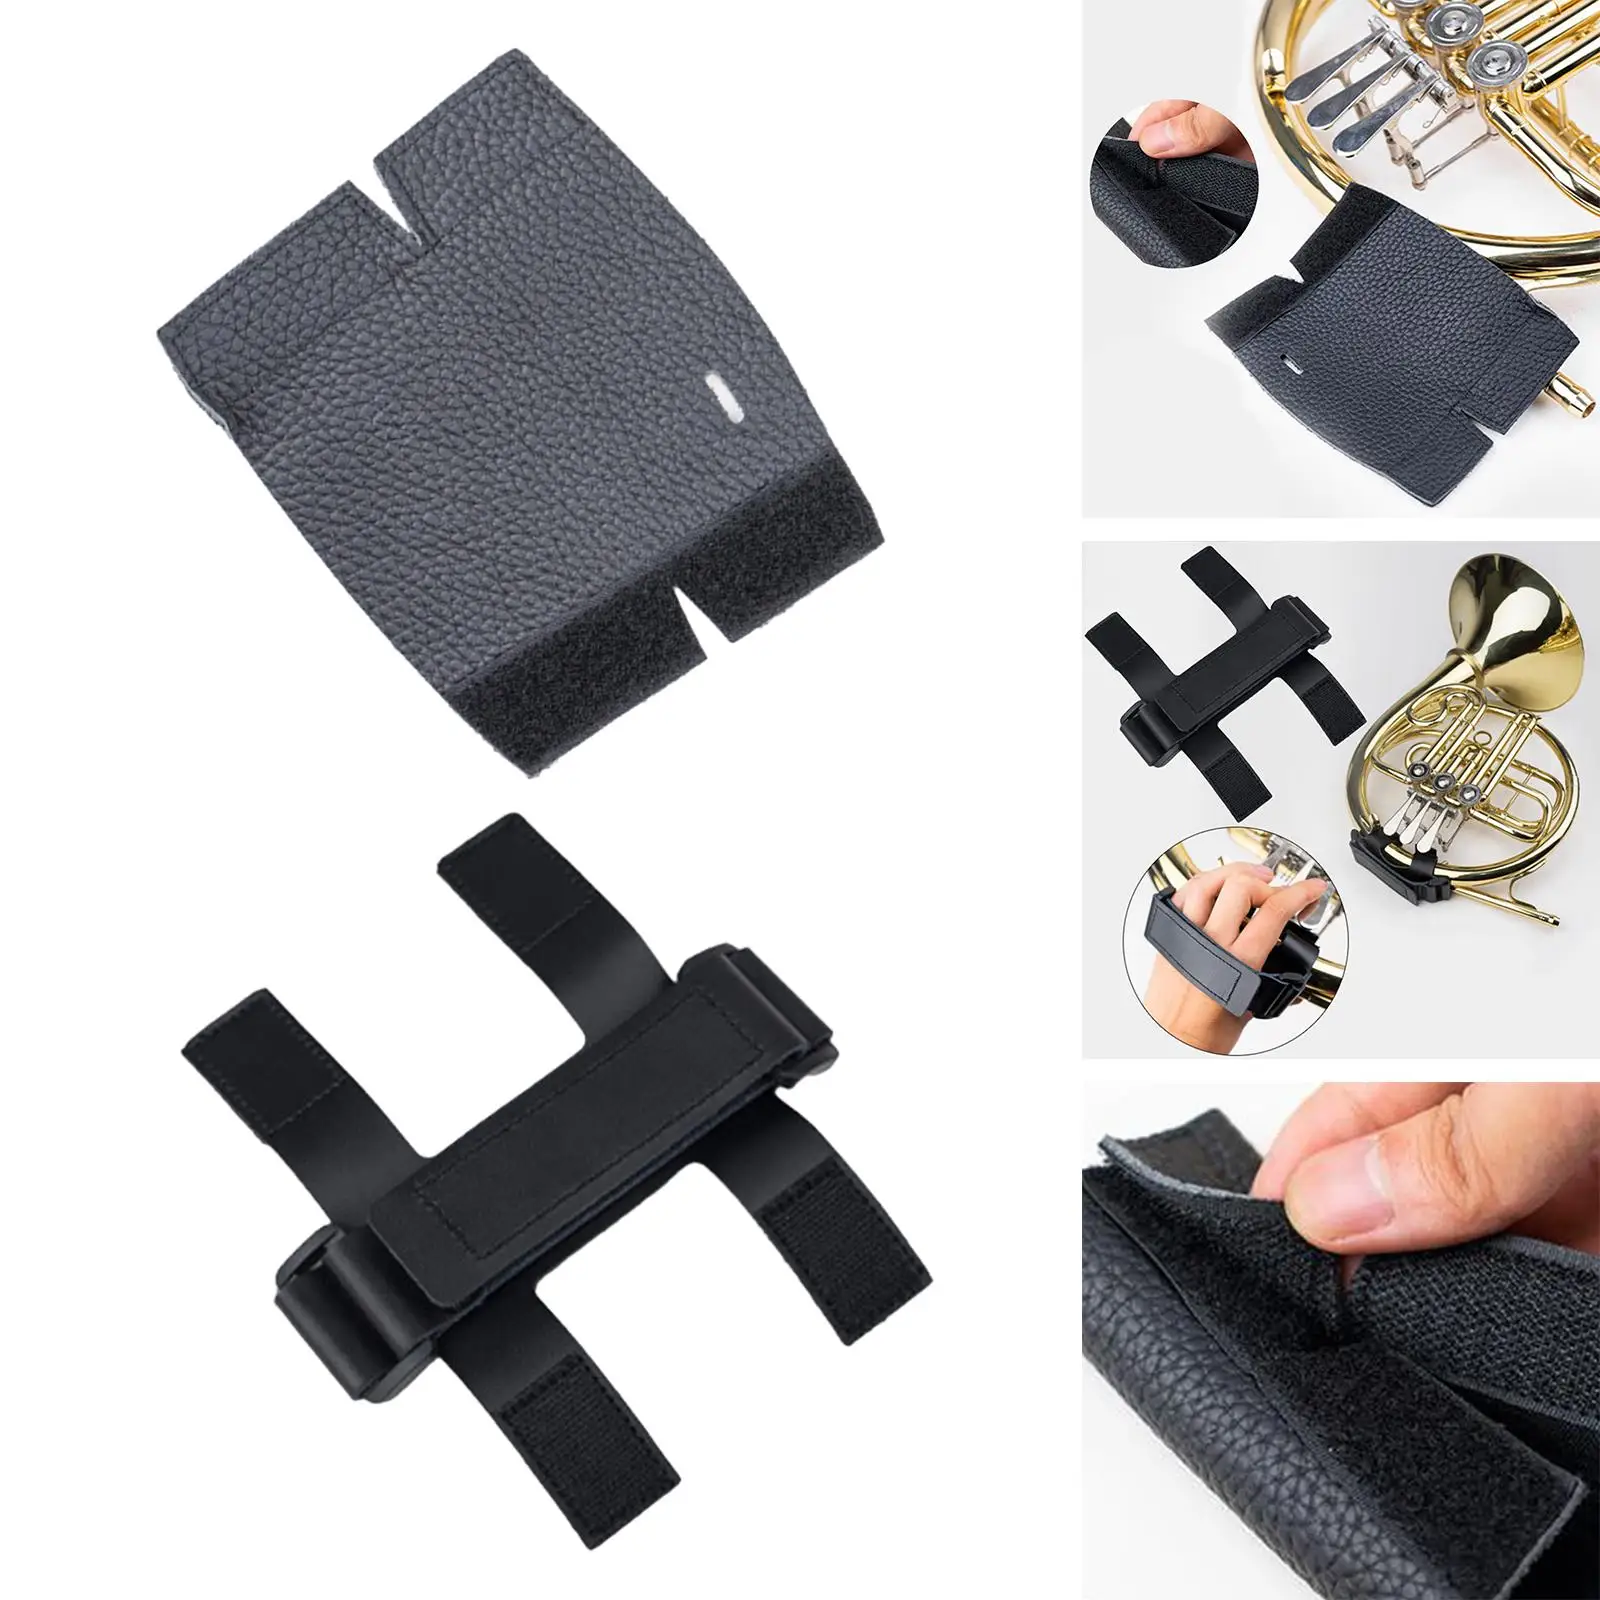 French Horn Hand Guard Portable Non Slip Brass Instrument Accessory PU Leather Wrap Cover for Stage Performance Practice